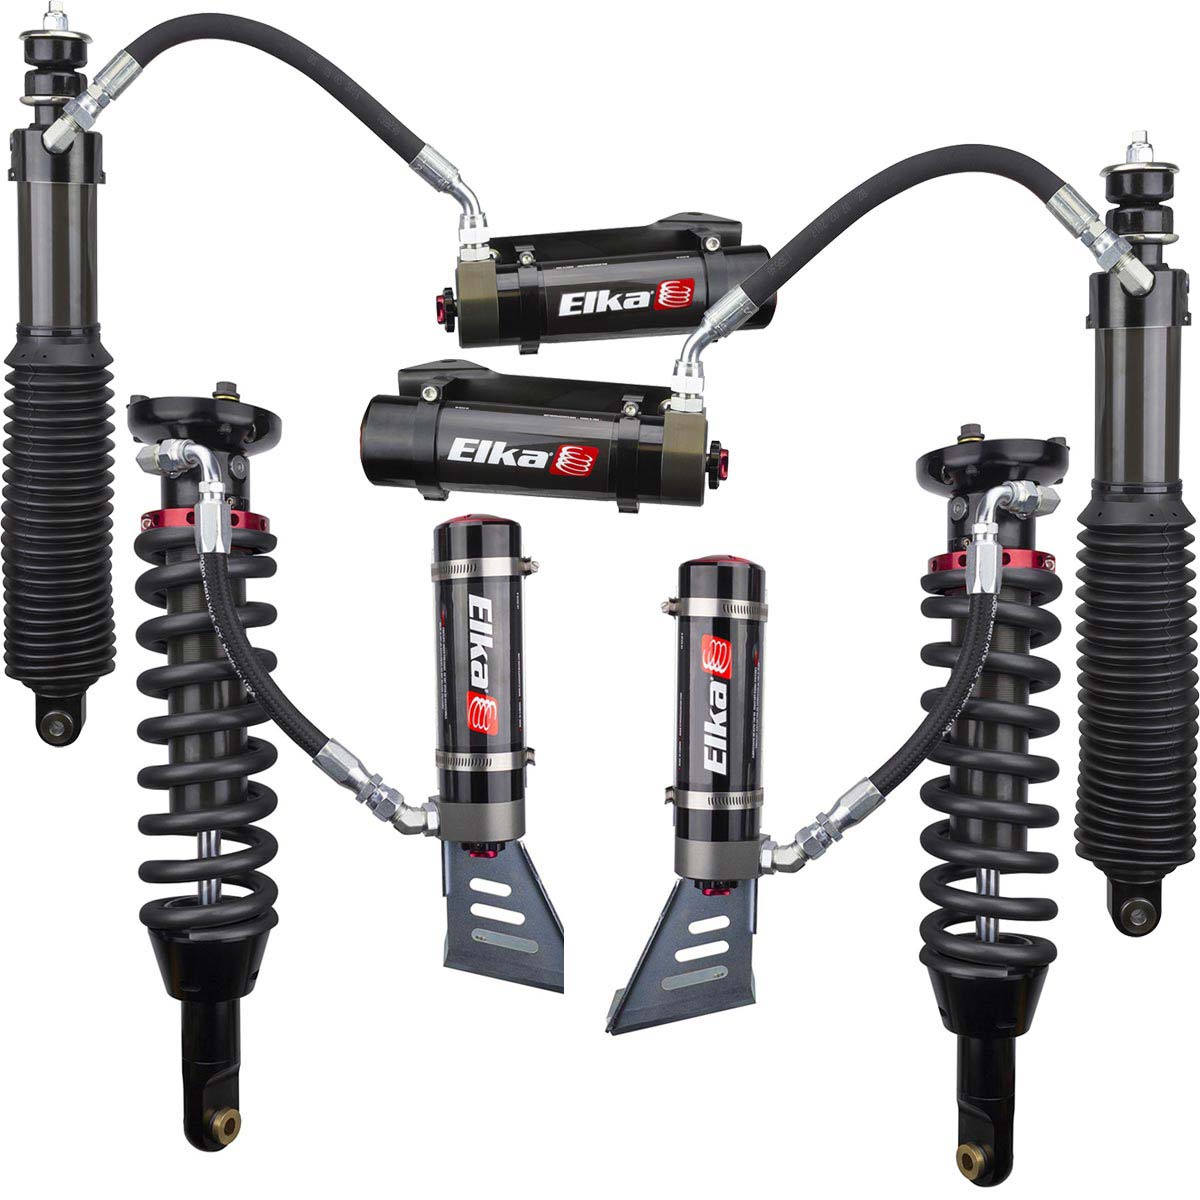 Elka 2.5 DC RESERVOIR FRONT & REAR SHOCKS KIT for TOYOTA 4RUNNER, 2010 to 2020 (non-KDSS) (2 in. to 3 in. lift) w/Compression Adjust